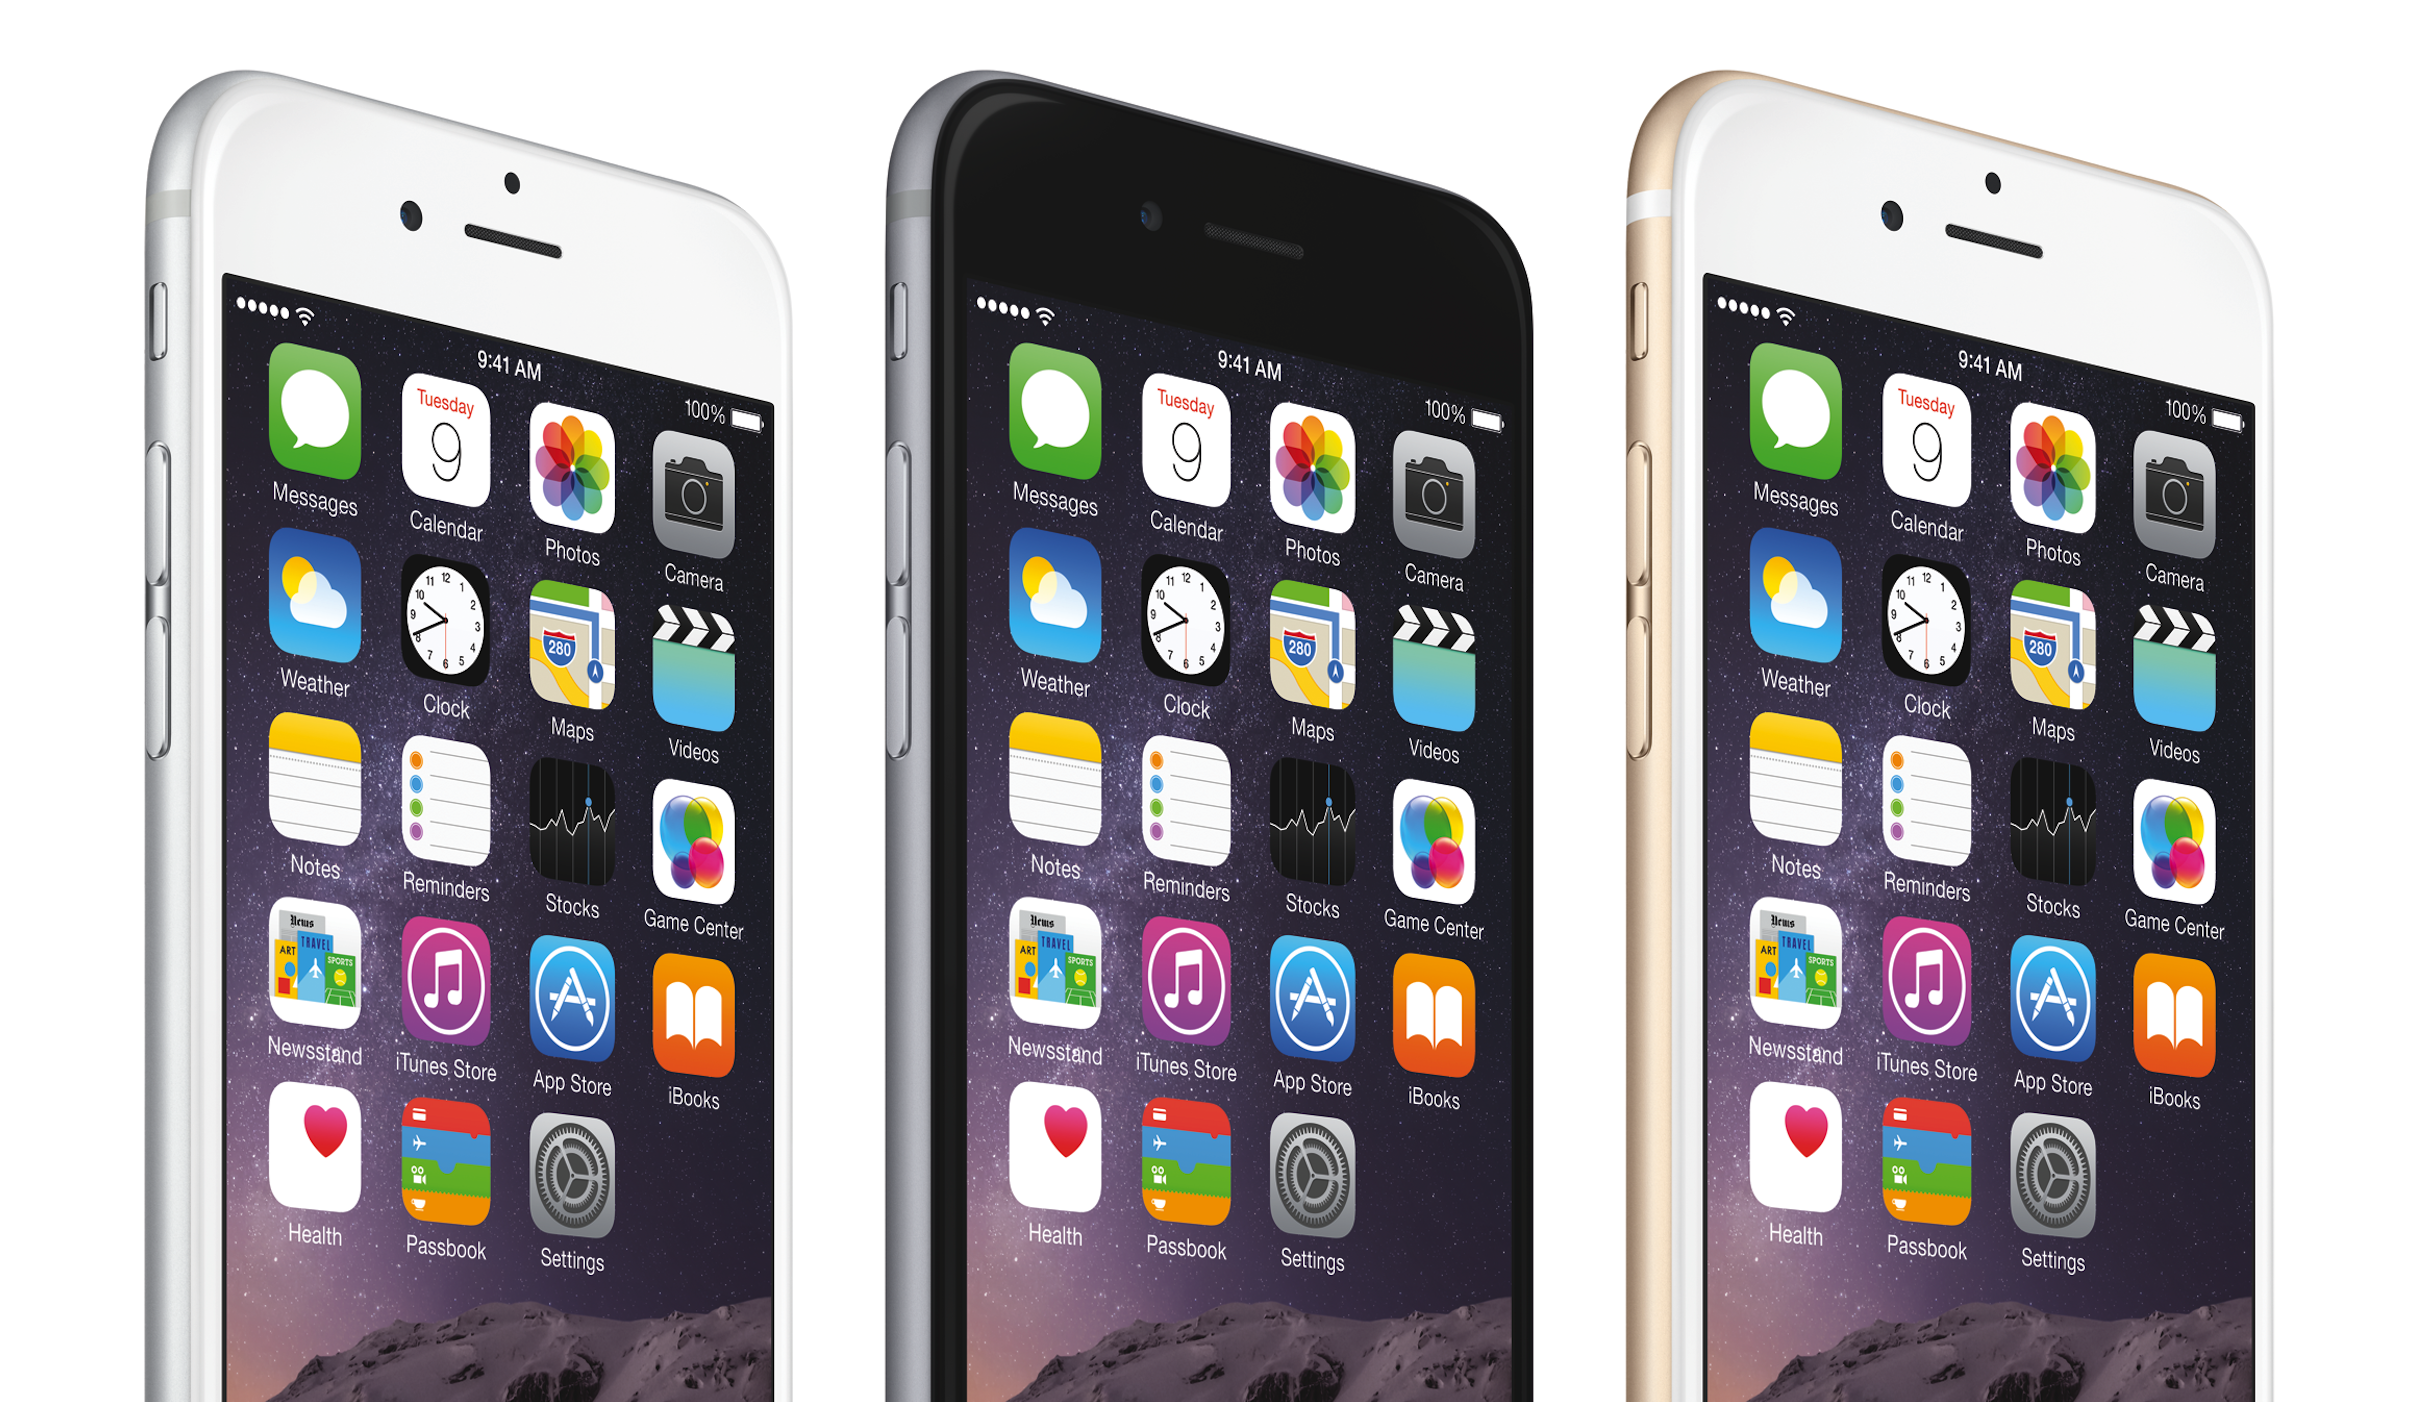 iPhone 6 vs iPhone 6 Plus: Which one should you buy? - 9to5Mac